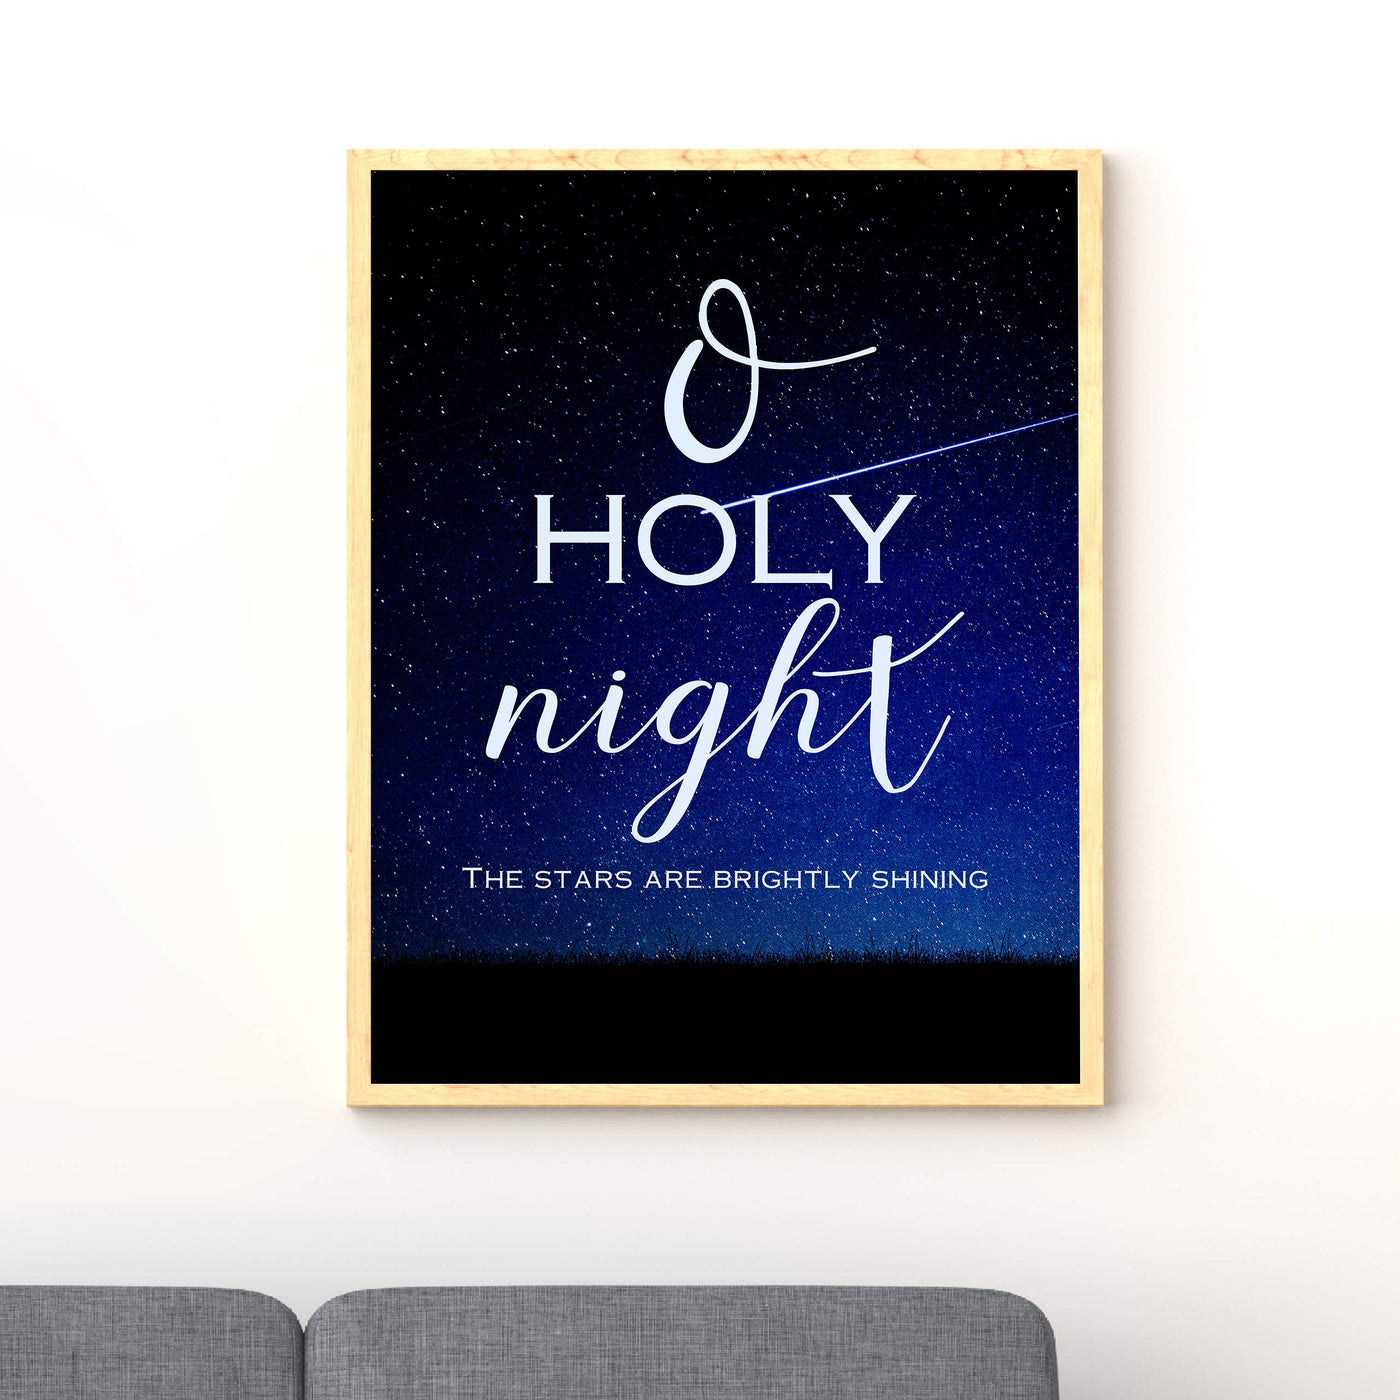 O Holy Night Christmas Song Wall Art -11 x 14" Christian Holiday Poster Print-Ready to Frame. Typographic w/Starry Night Design. Home-Welcome-Kitchen-Farmhouse Decor. Great Religious Gift!